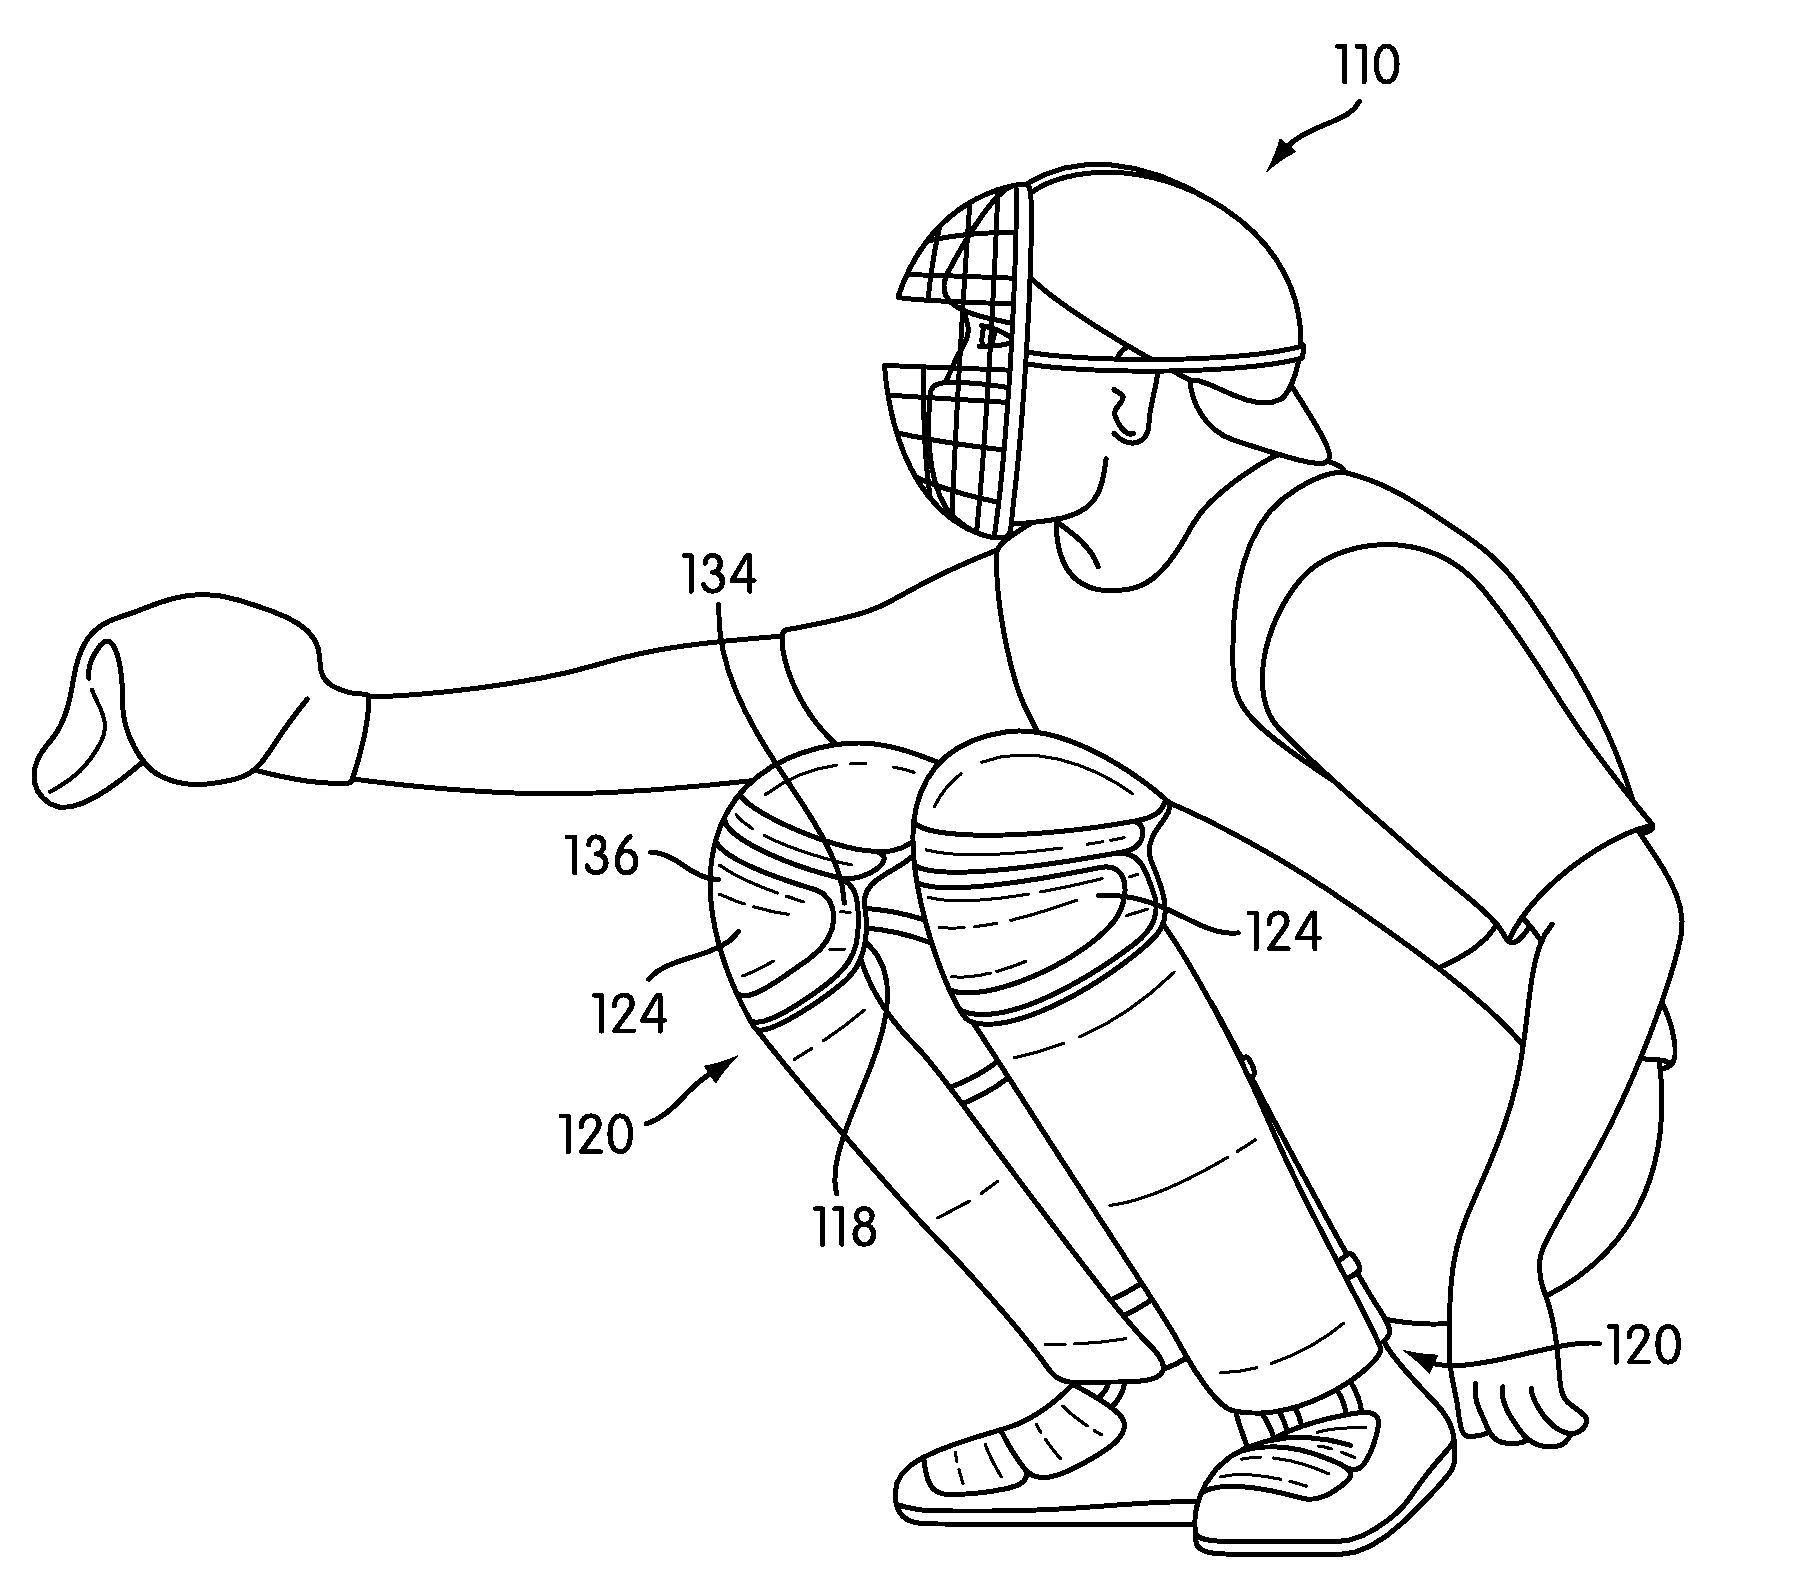 Protective knee covering